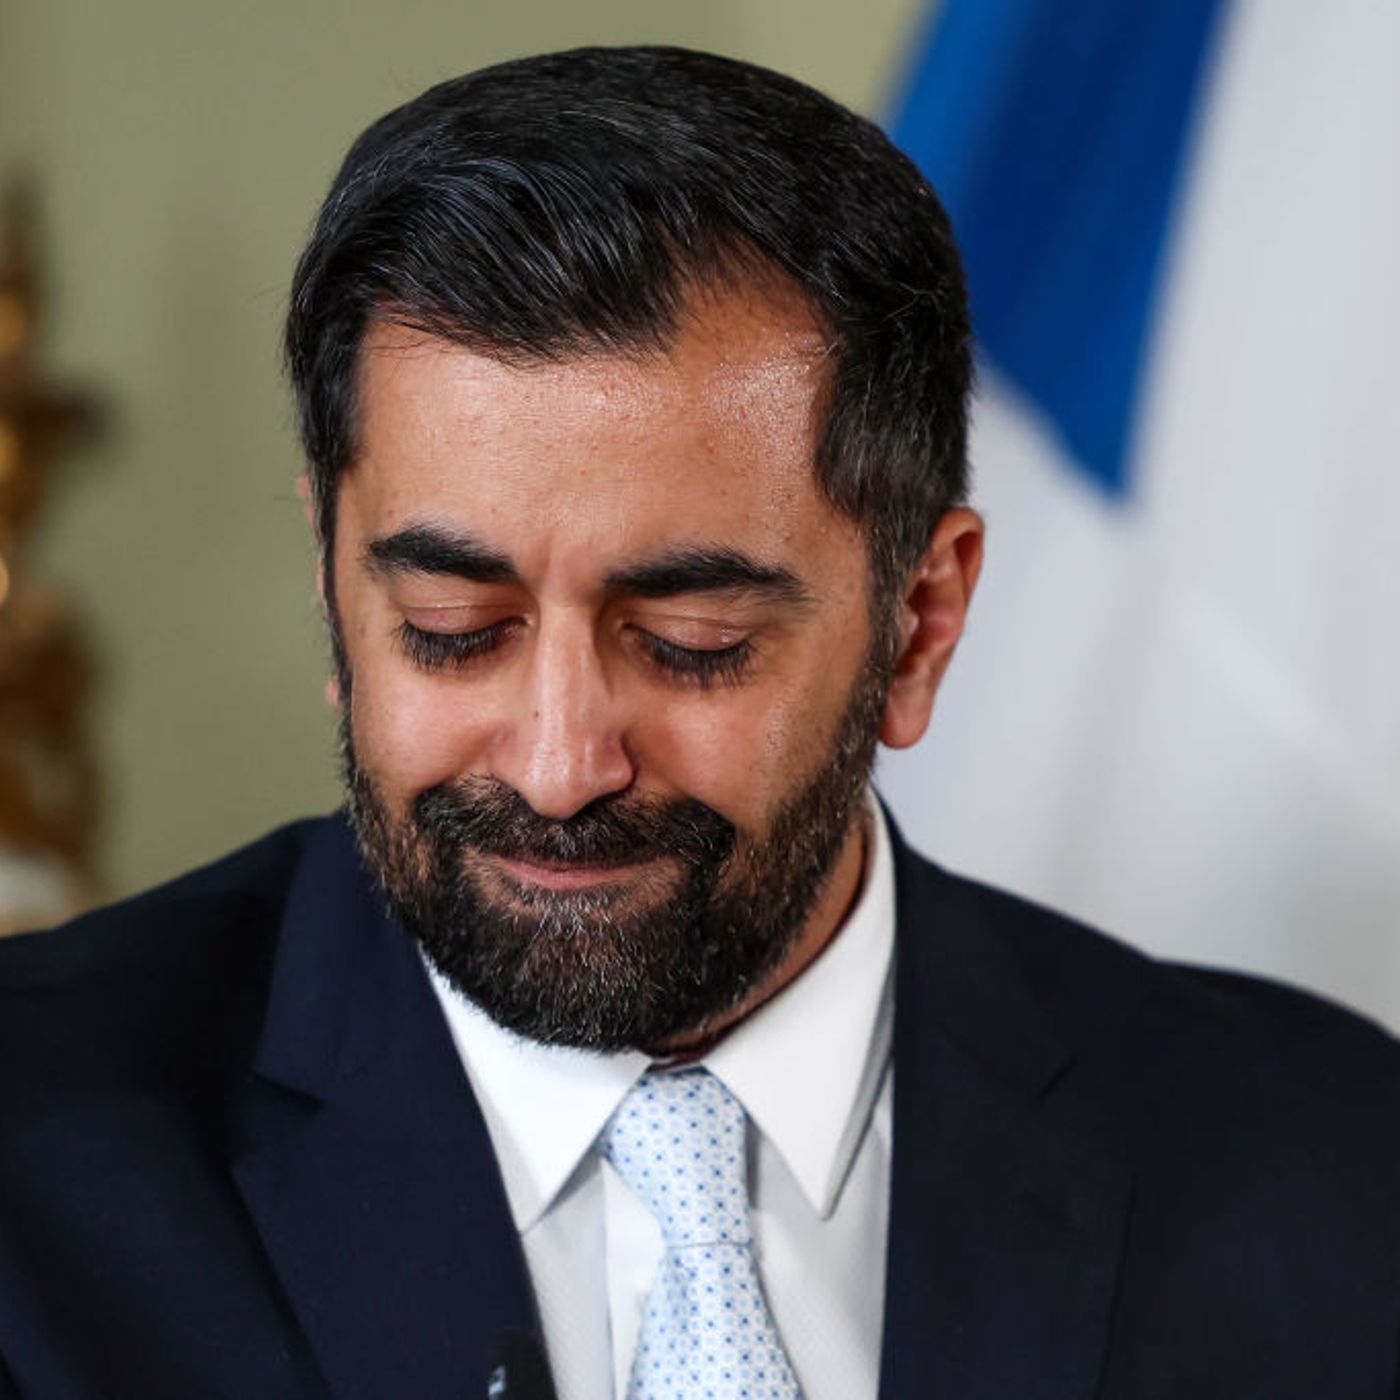 Is this the beginning of the end for Humza Yousaf?